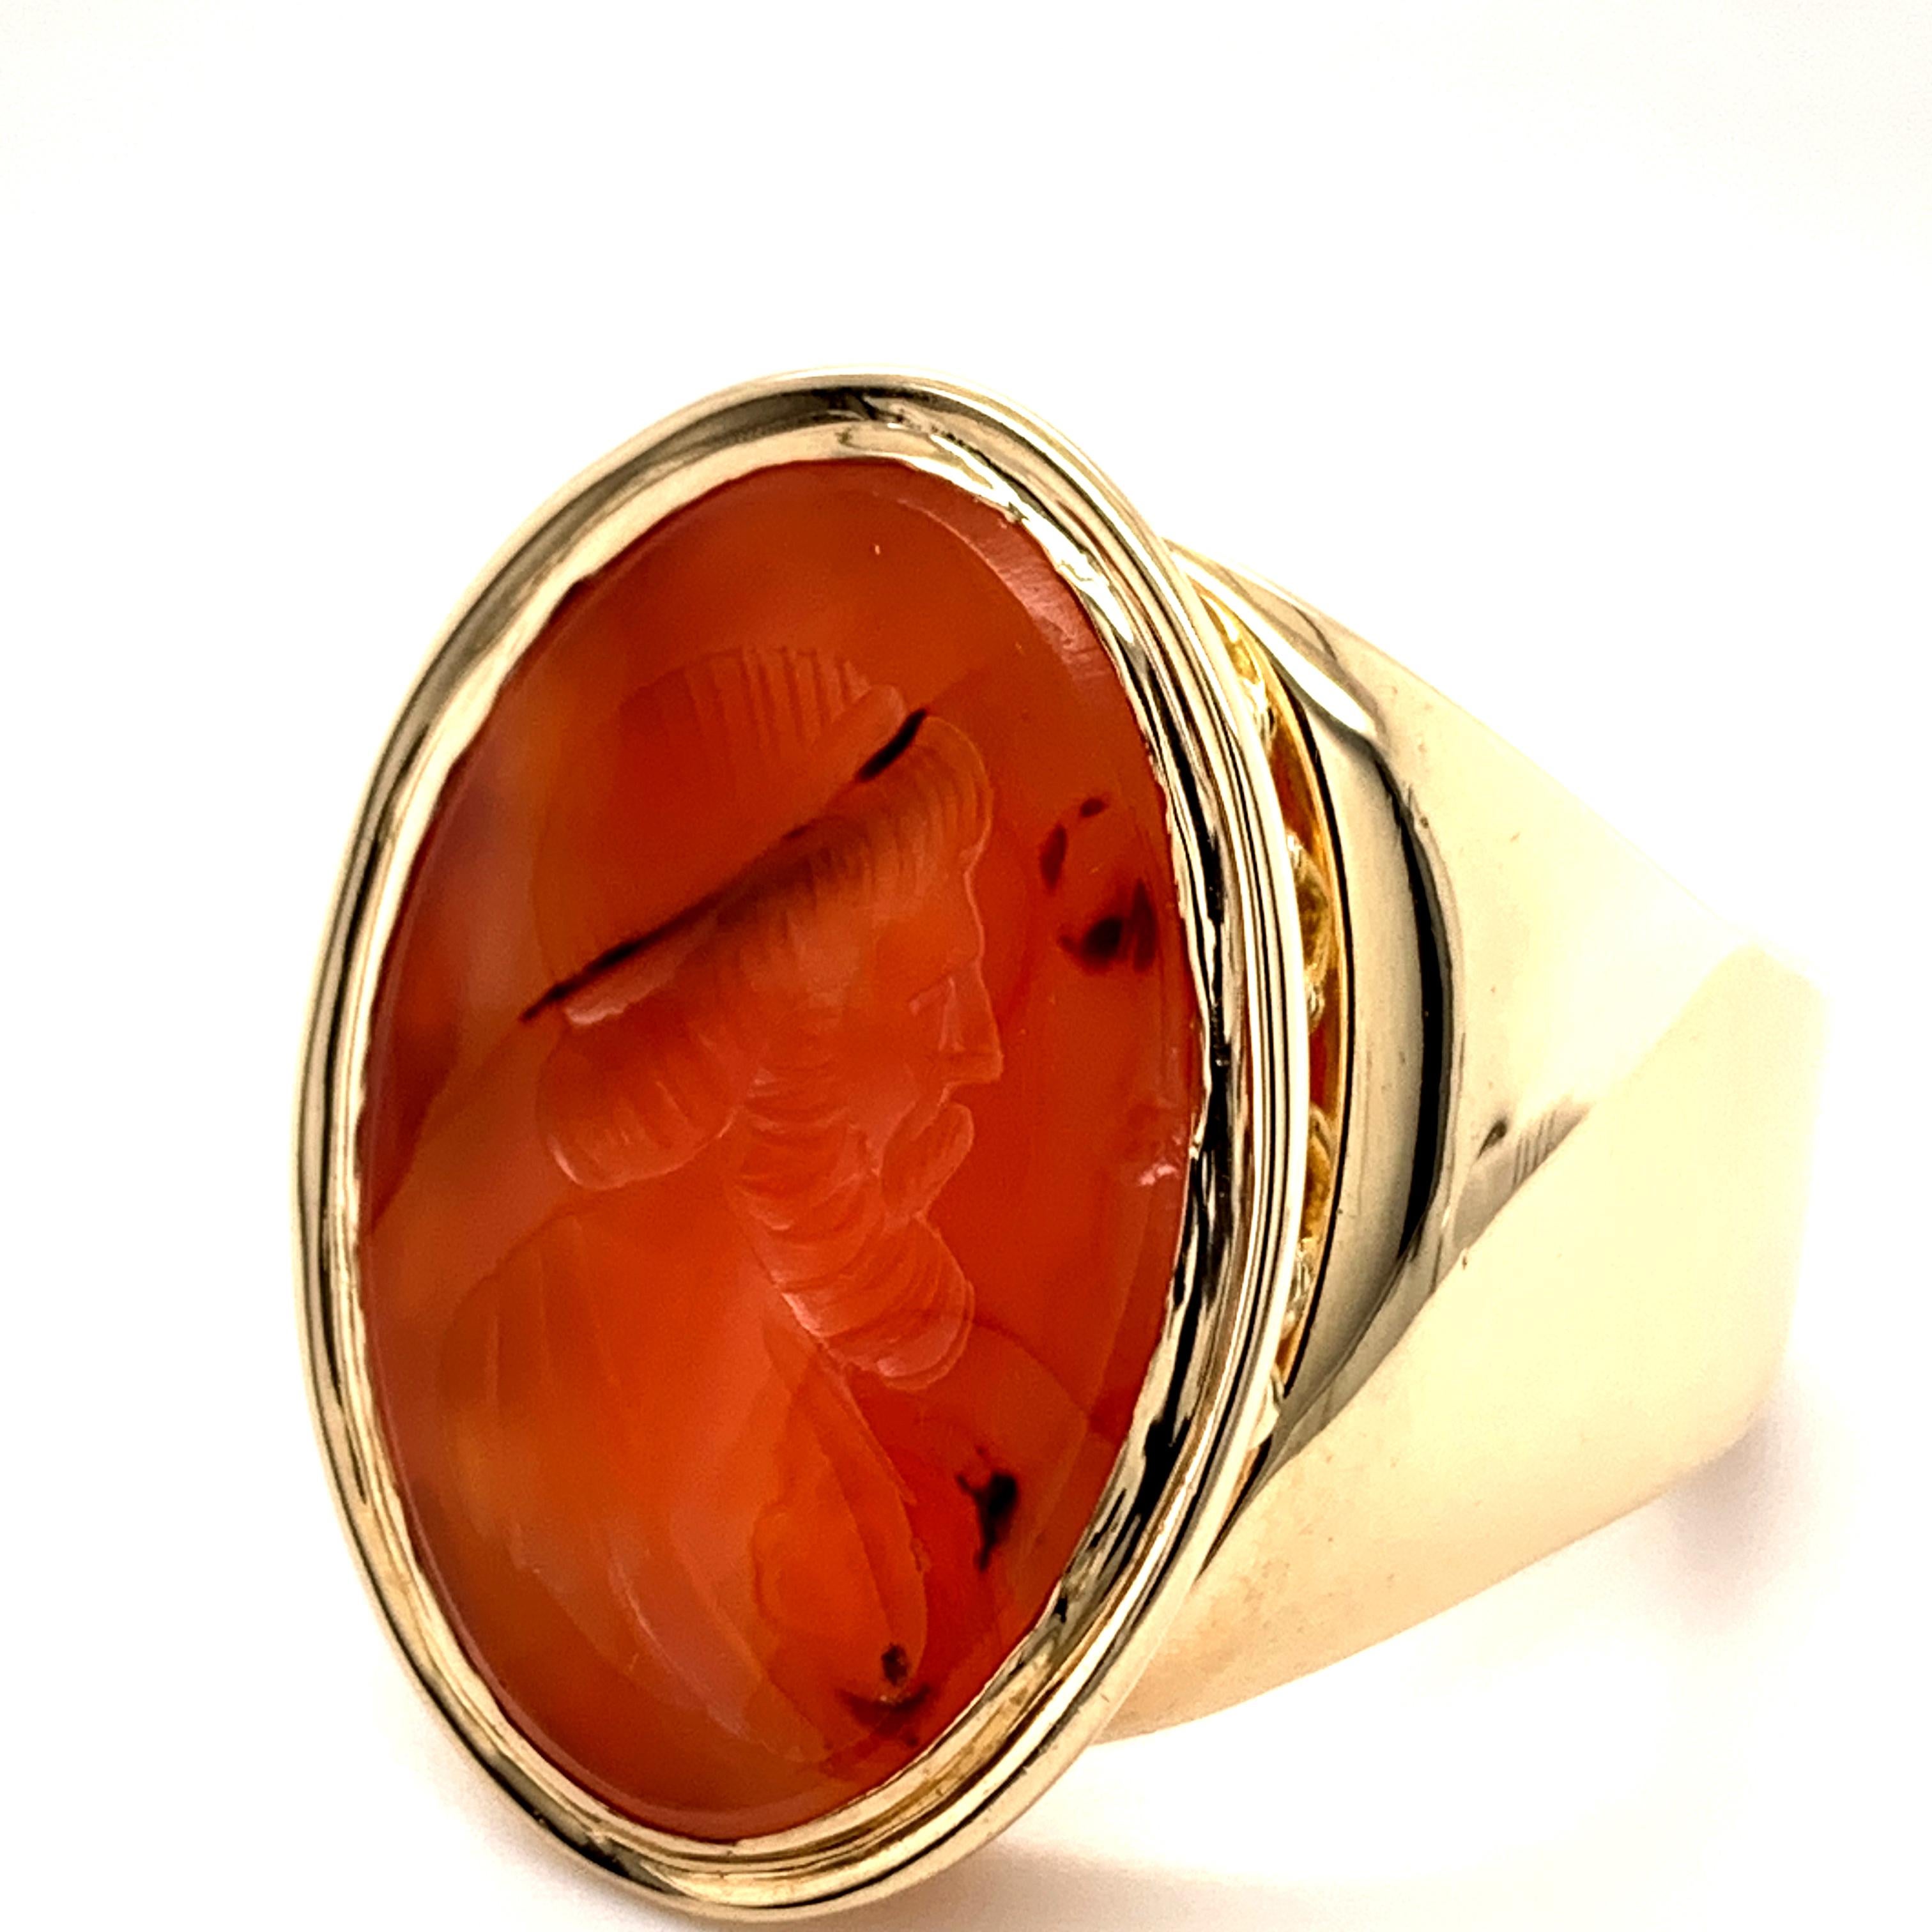 Very large and dramatic crest ring.  Oval shape.  The center is a deeply carved carnelian Roman head.  Set in a solid gauge 14K yellow gold mounting.  Size 12 and can be custom sized.  The front of the ring measures 3/4